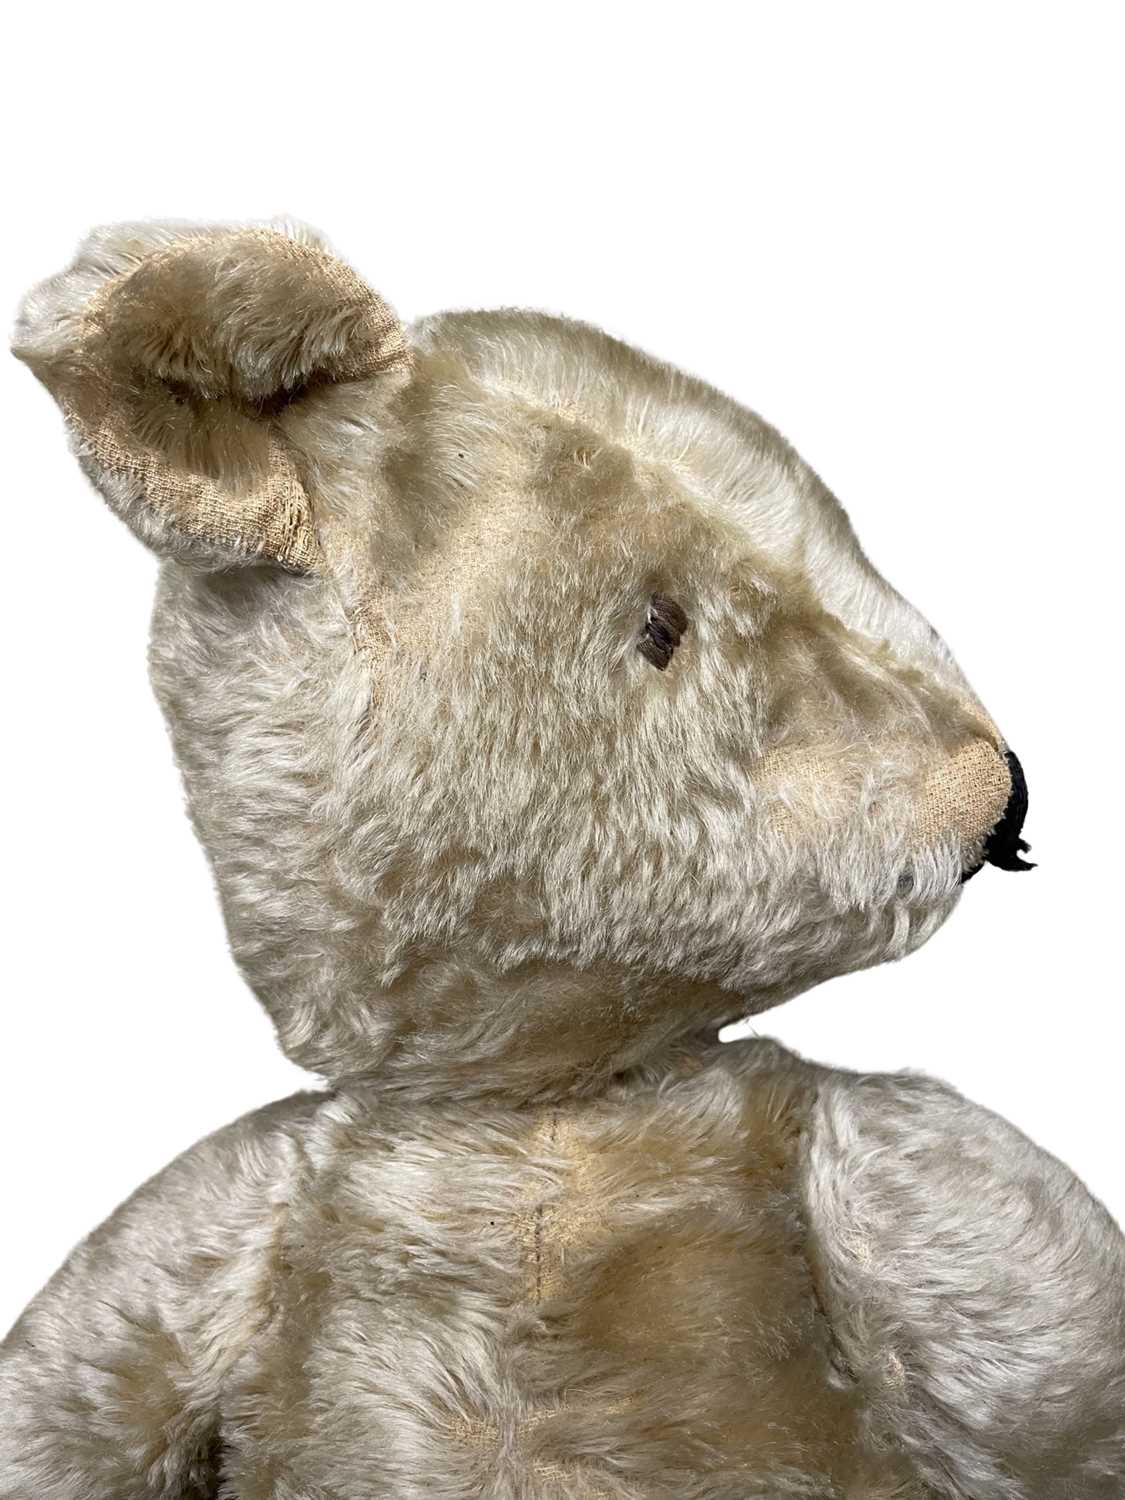 A large vintage 5-jointed teddy bear, with hand-sewn eyes, snout and paw detail. No maker's mark, - Image 2 of 3